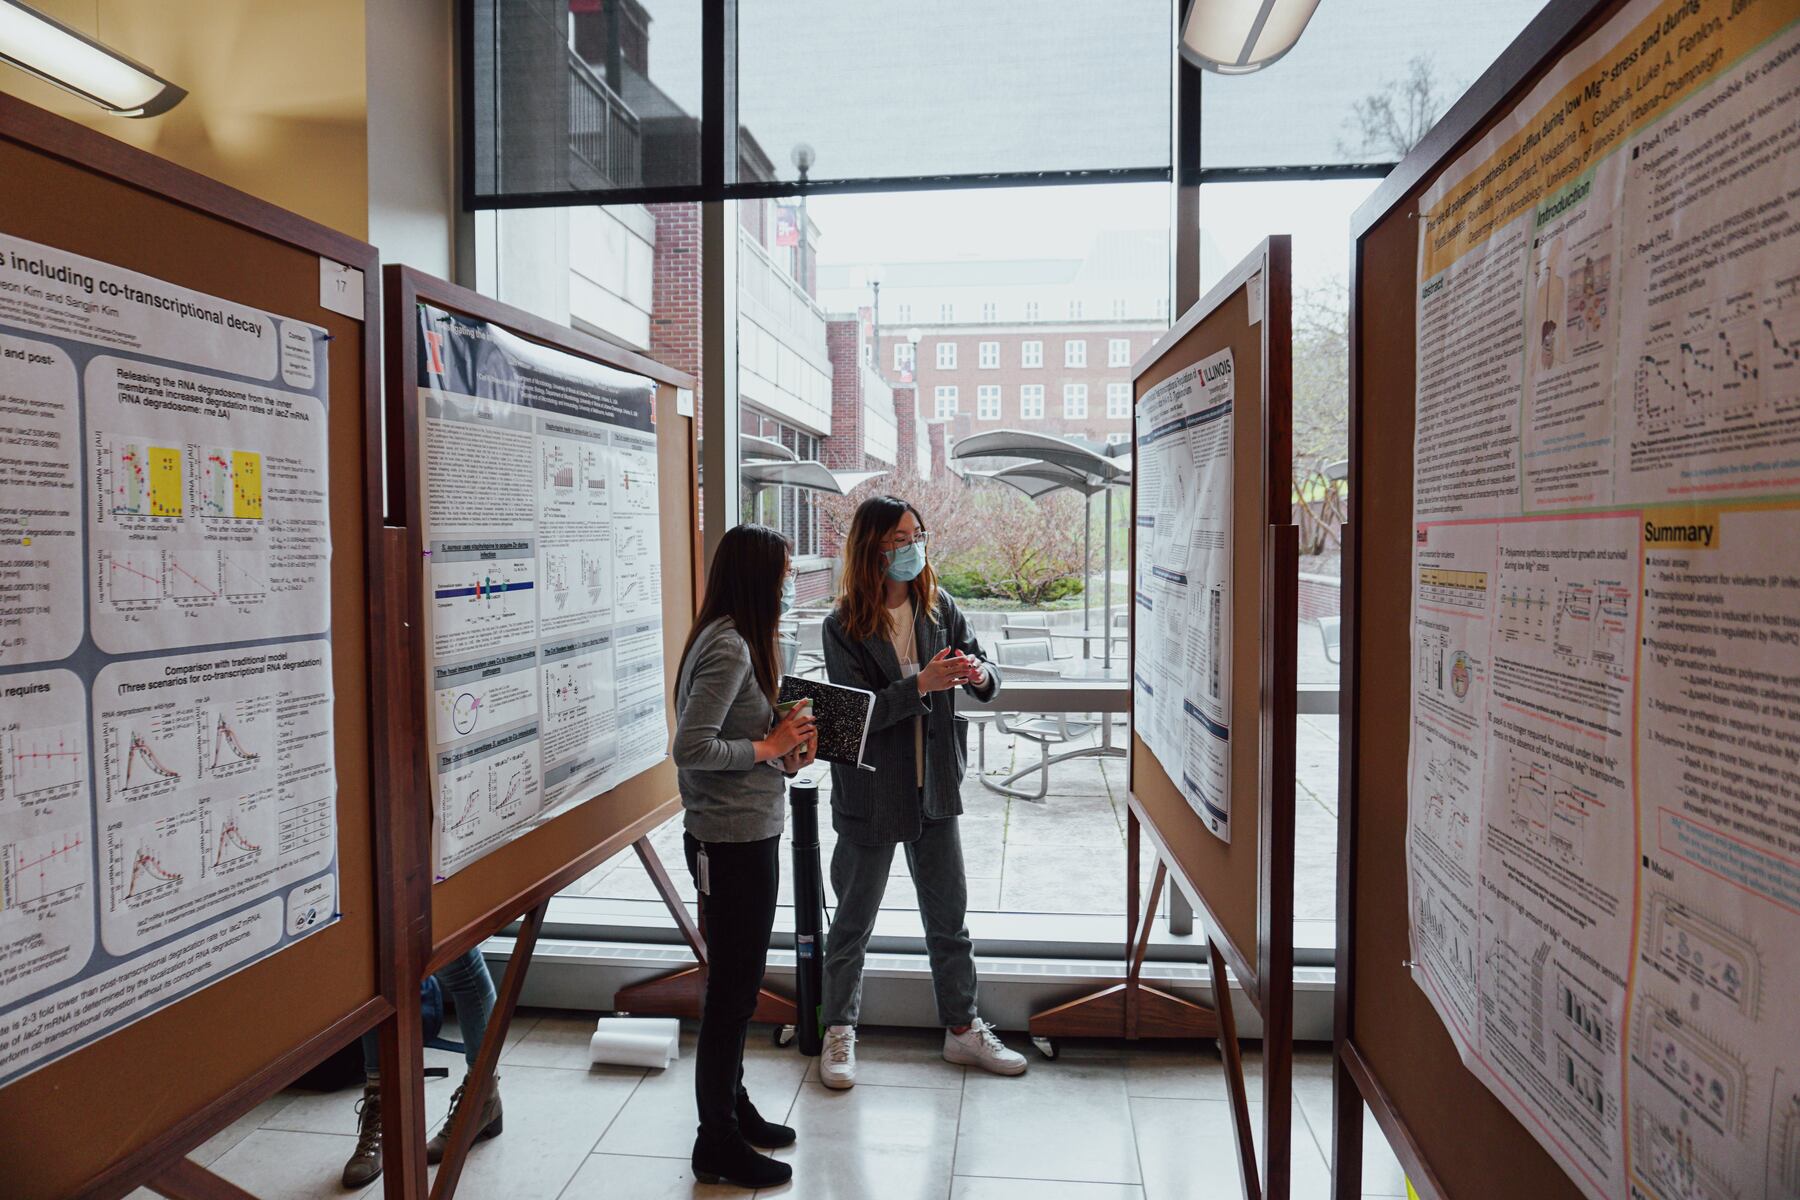 Two students at the poster session during the 2022 symposium